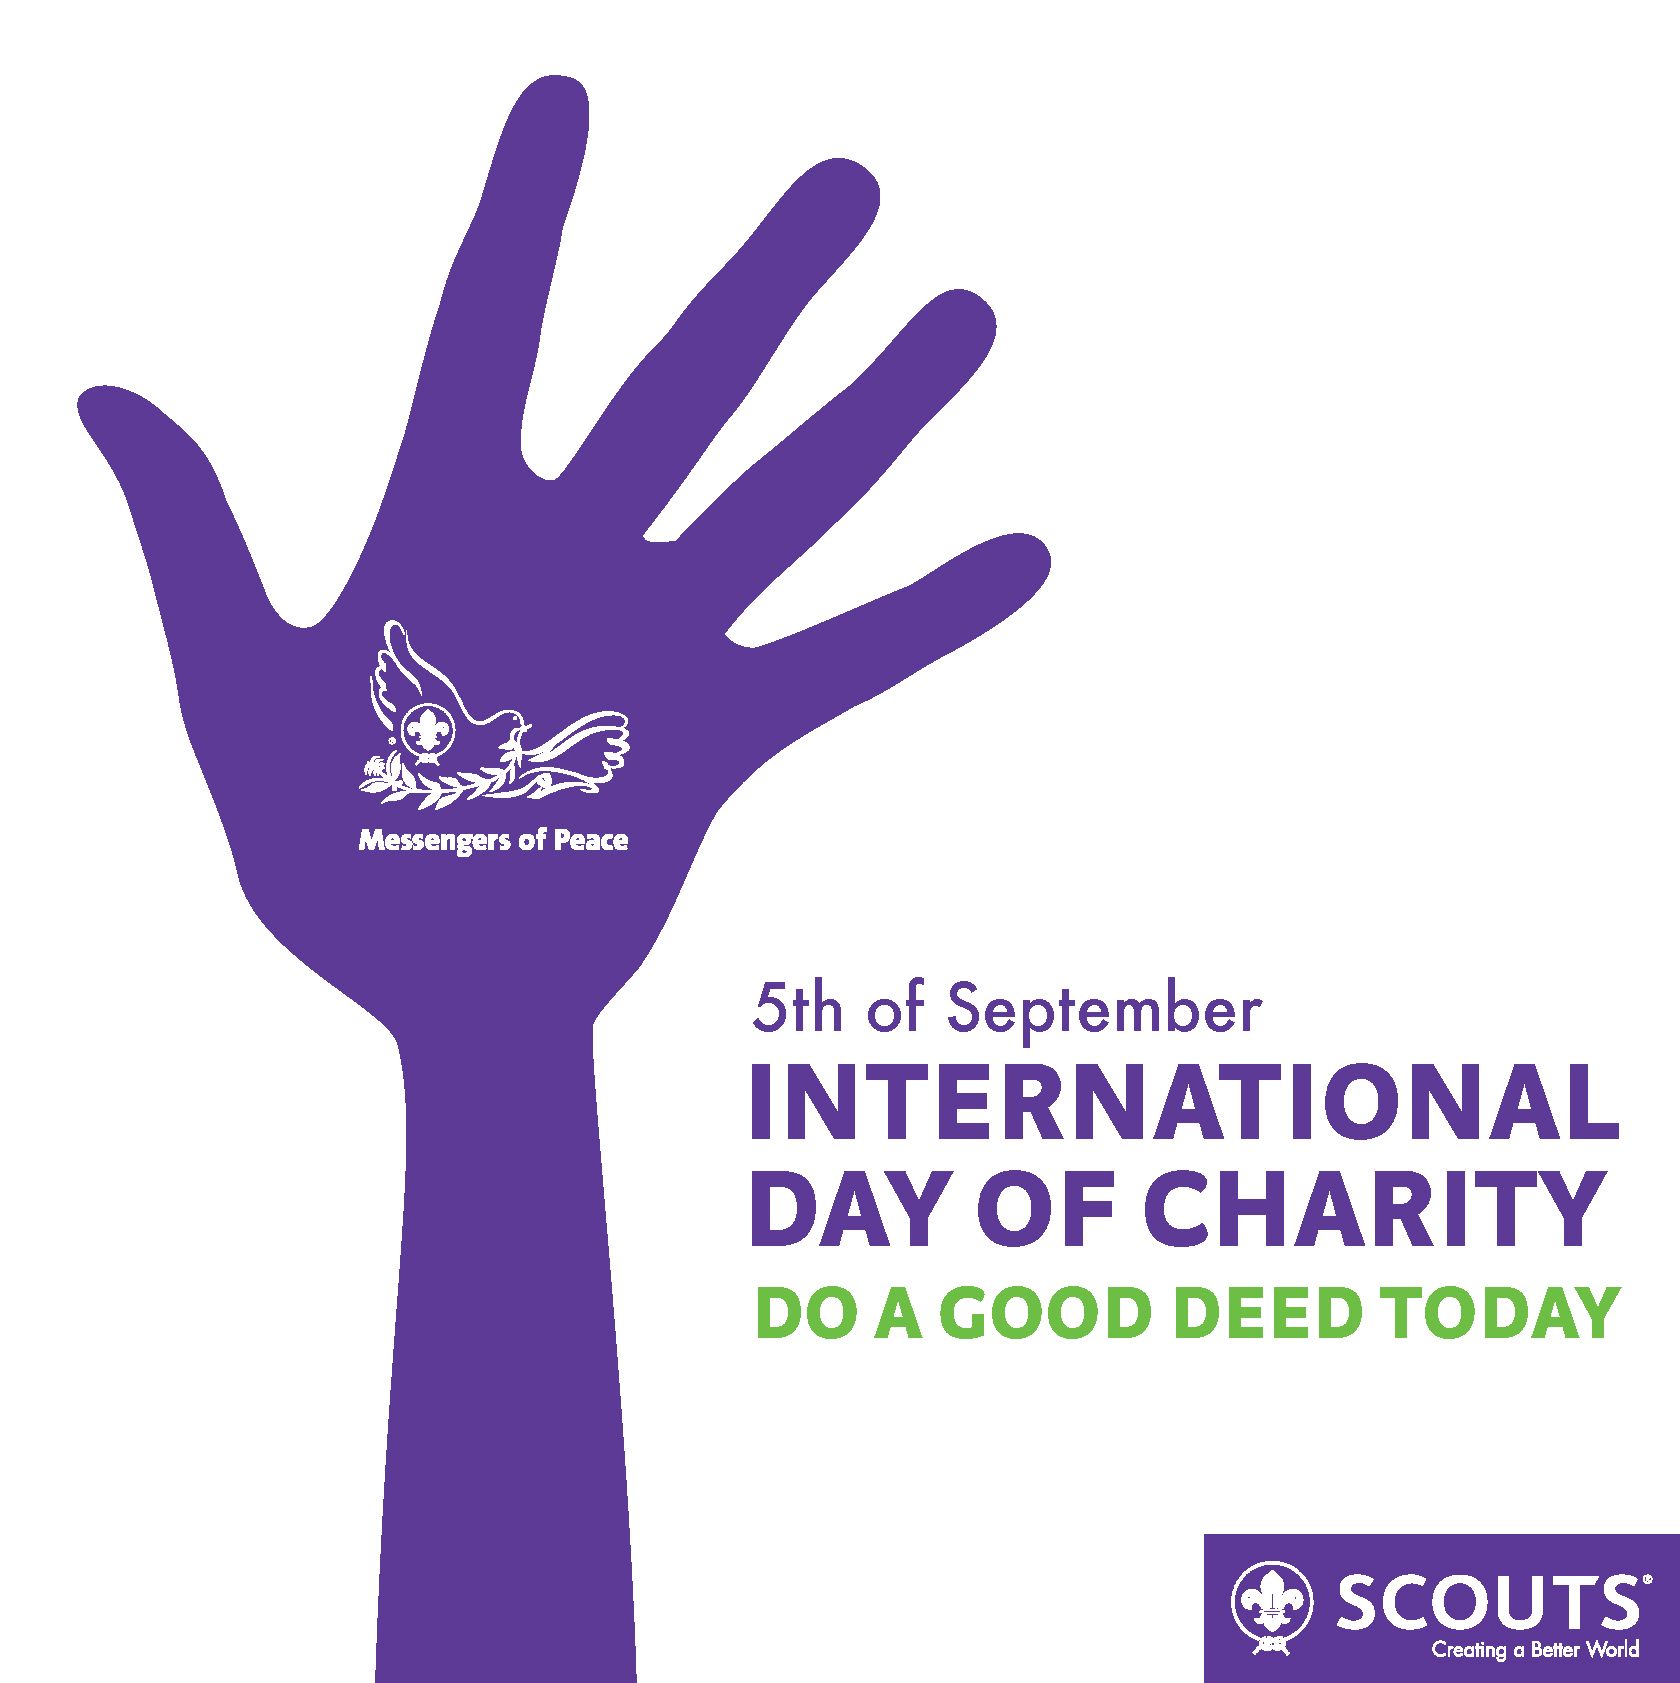 5th of september International Day of Charity do a good deed today